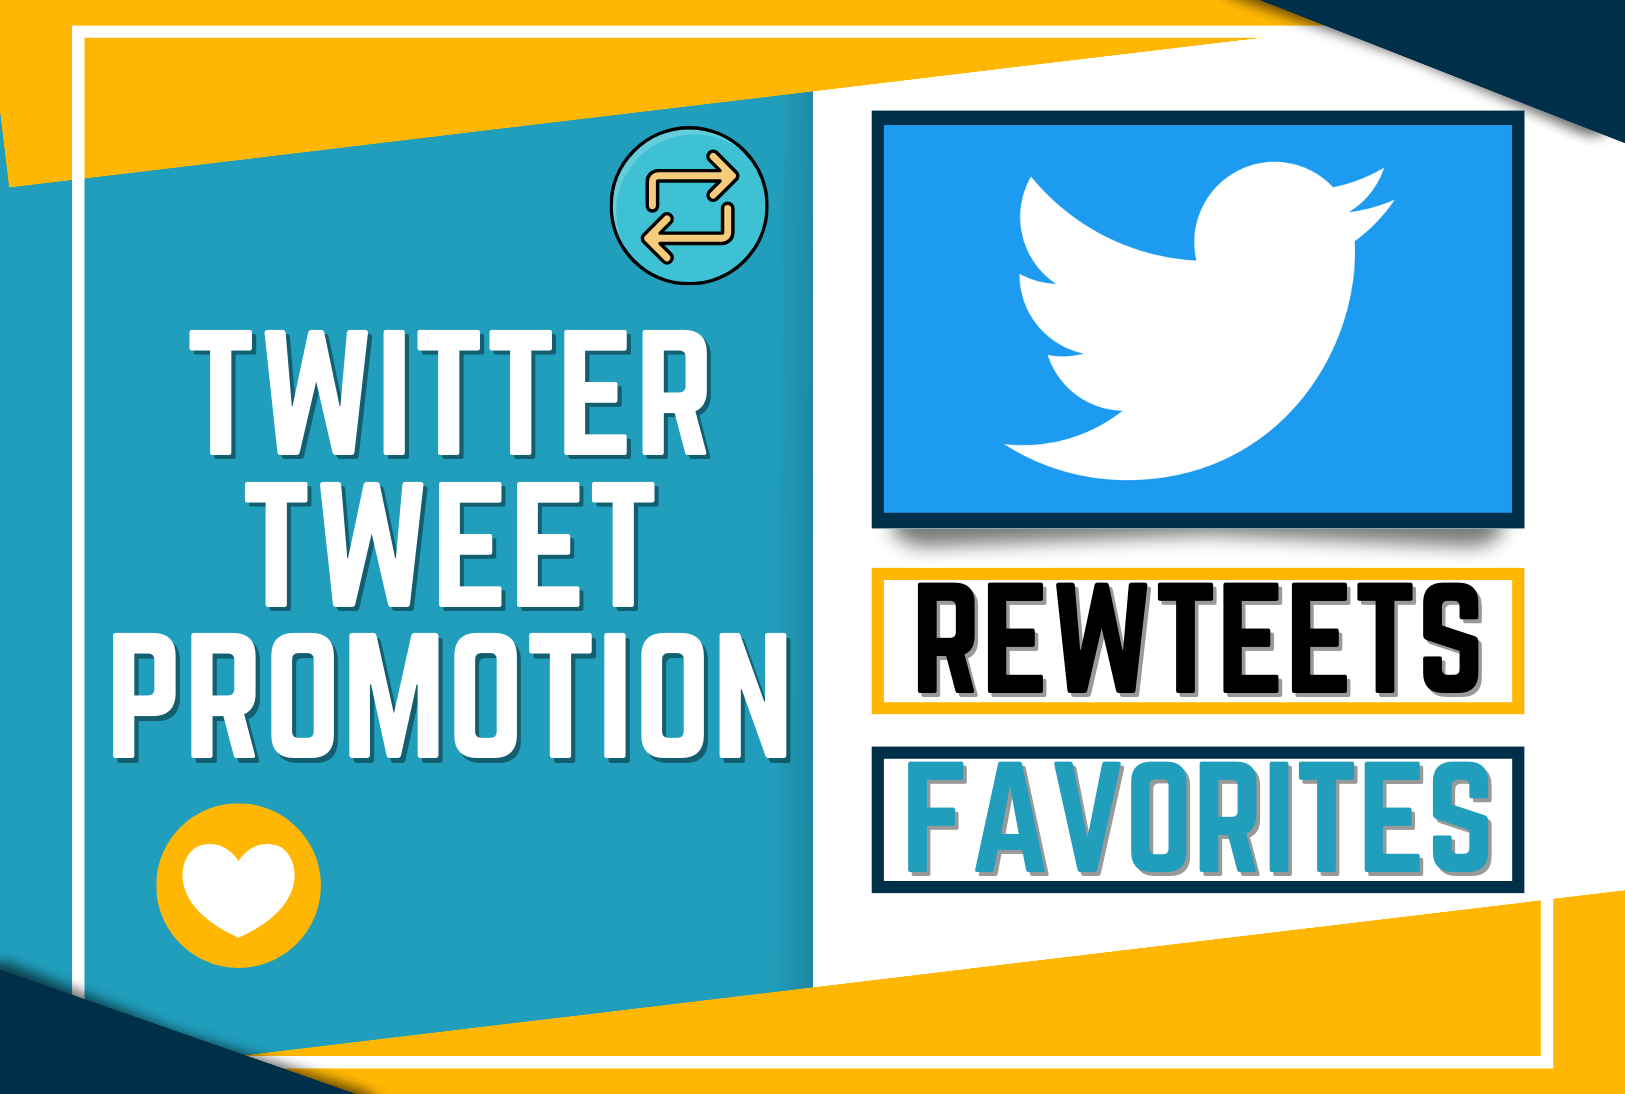 Get 100 Twitter Real Retweets And 100 Favorites | Twitter Tweet Promotion Organically